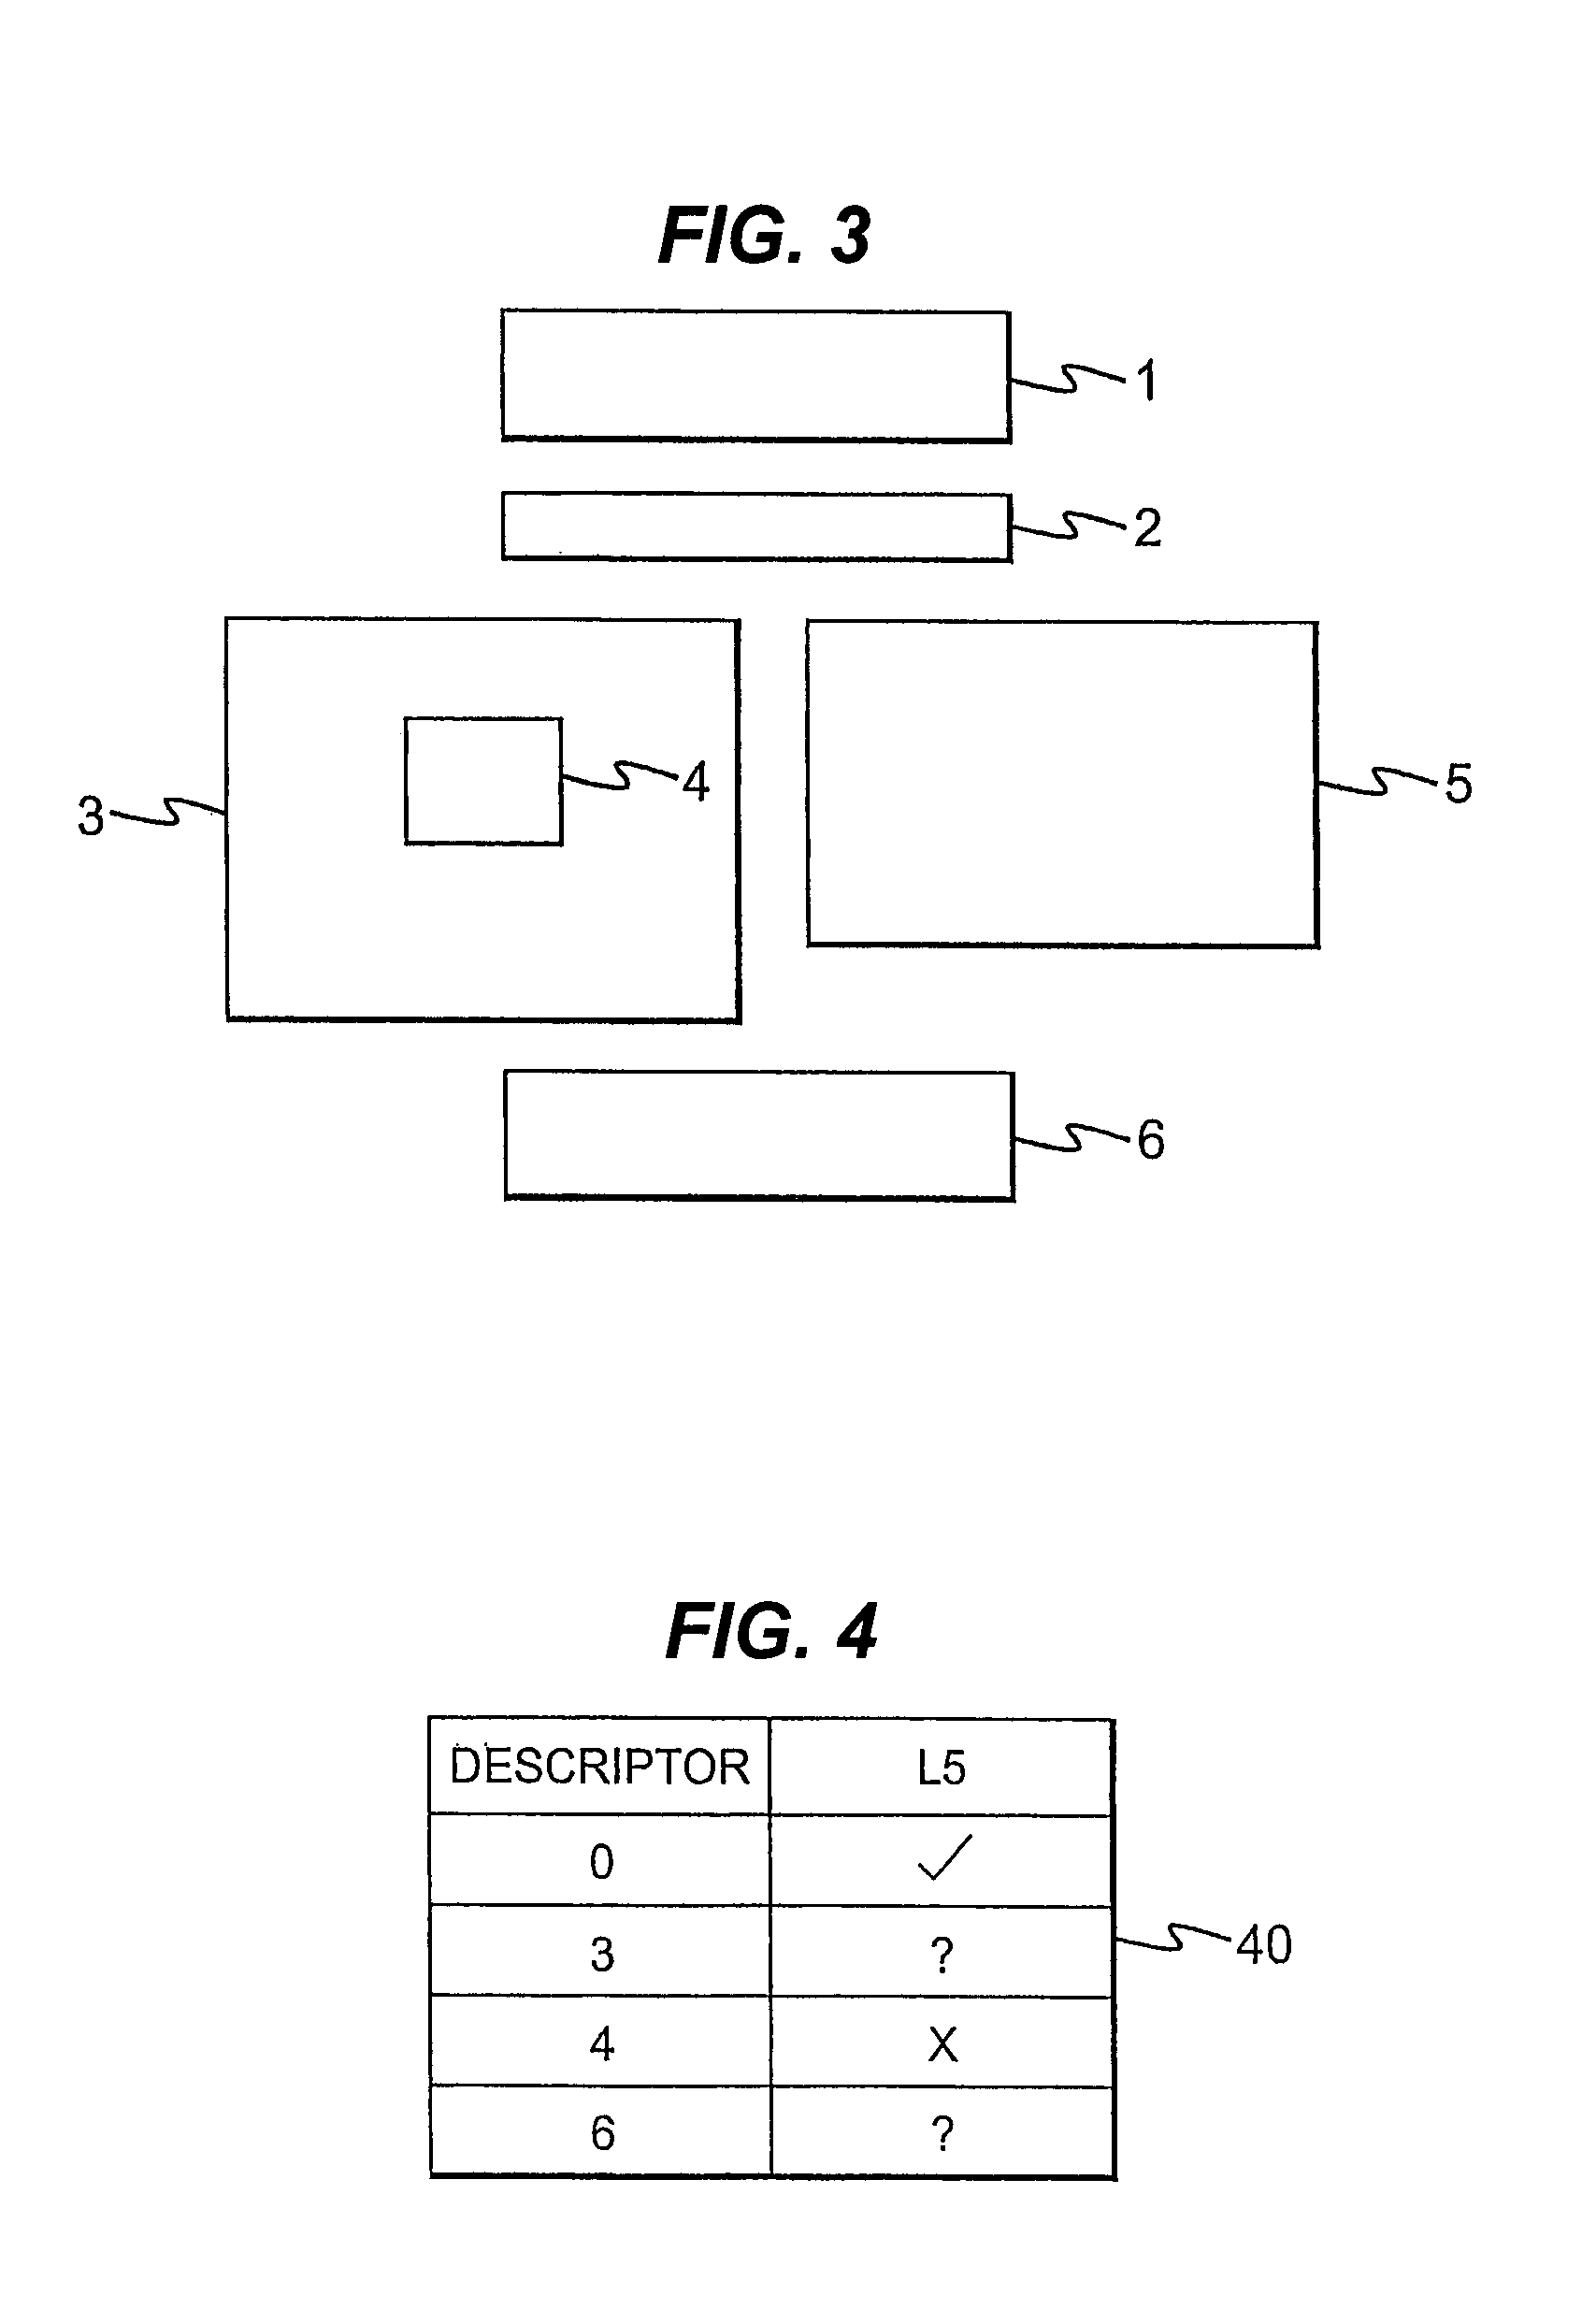 Data processing system with data transmit capability